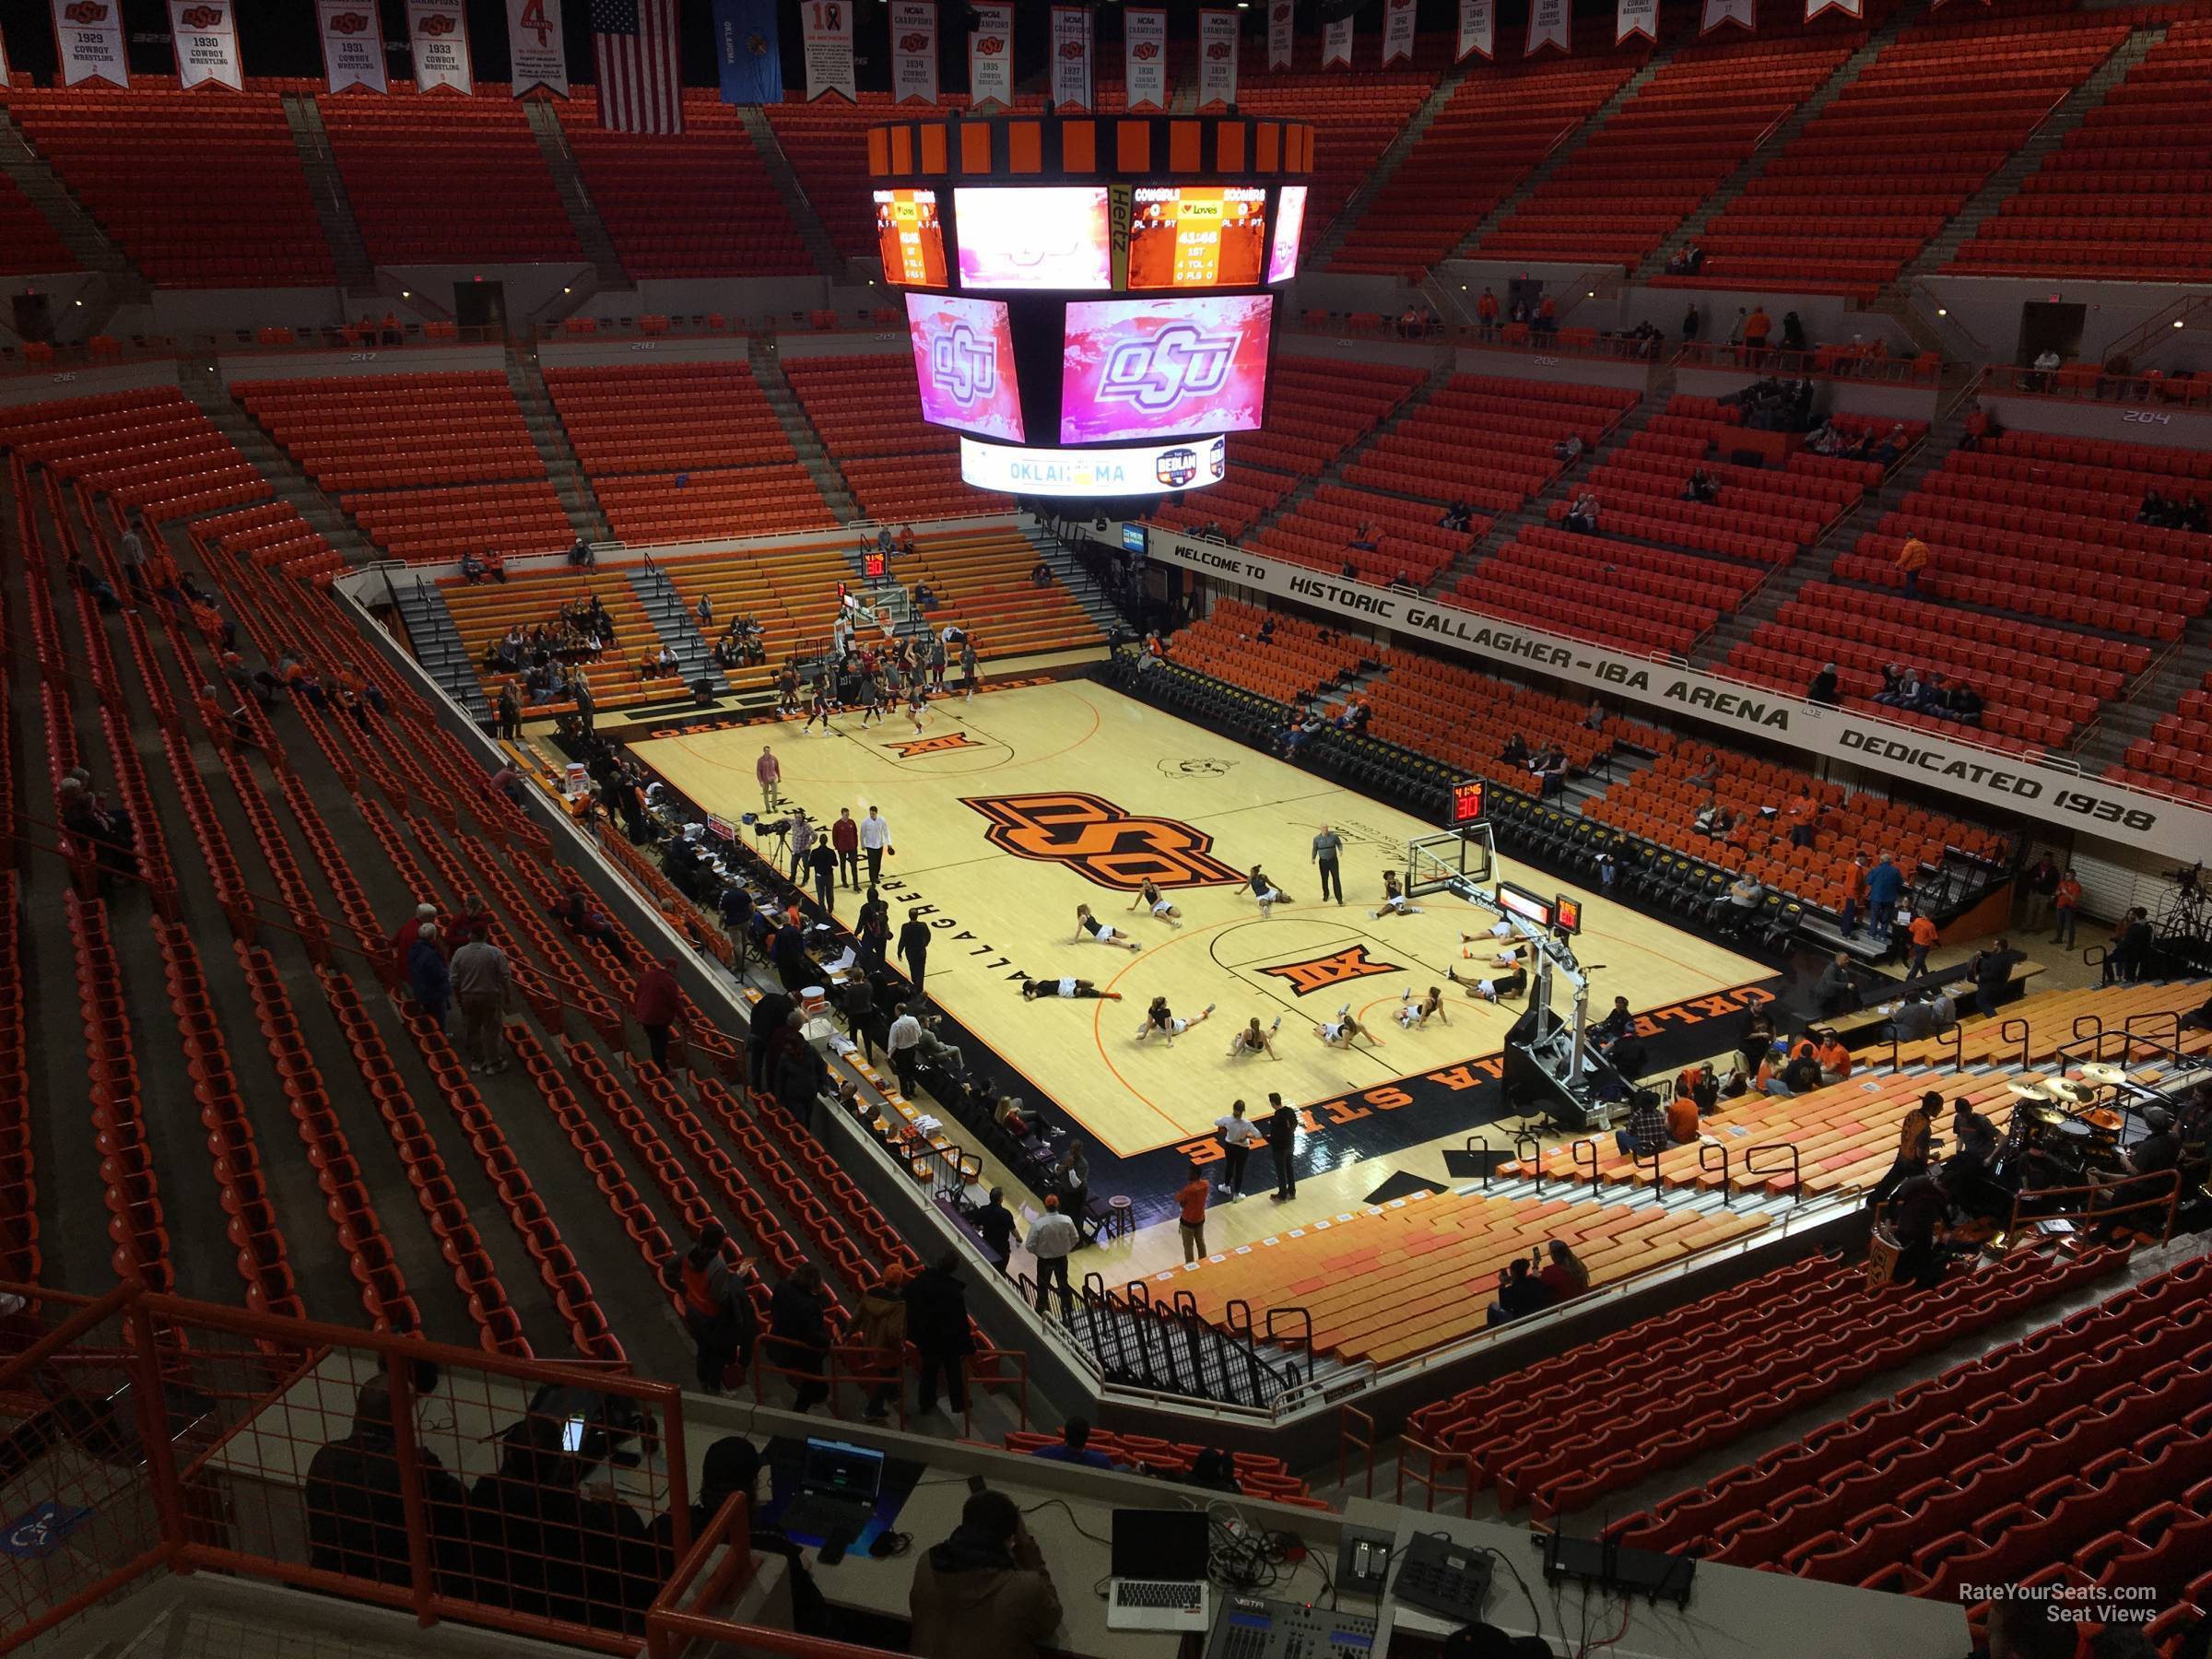 section 313, row 5 seat view  - gallagher-iba arena